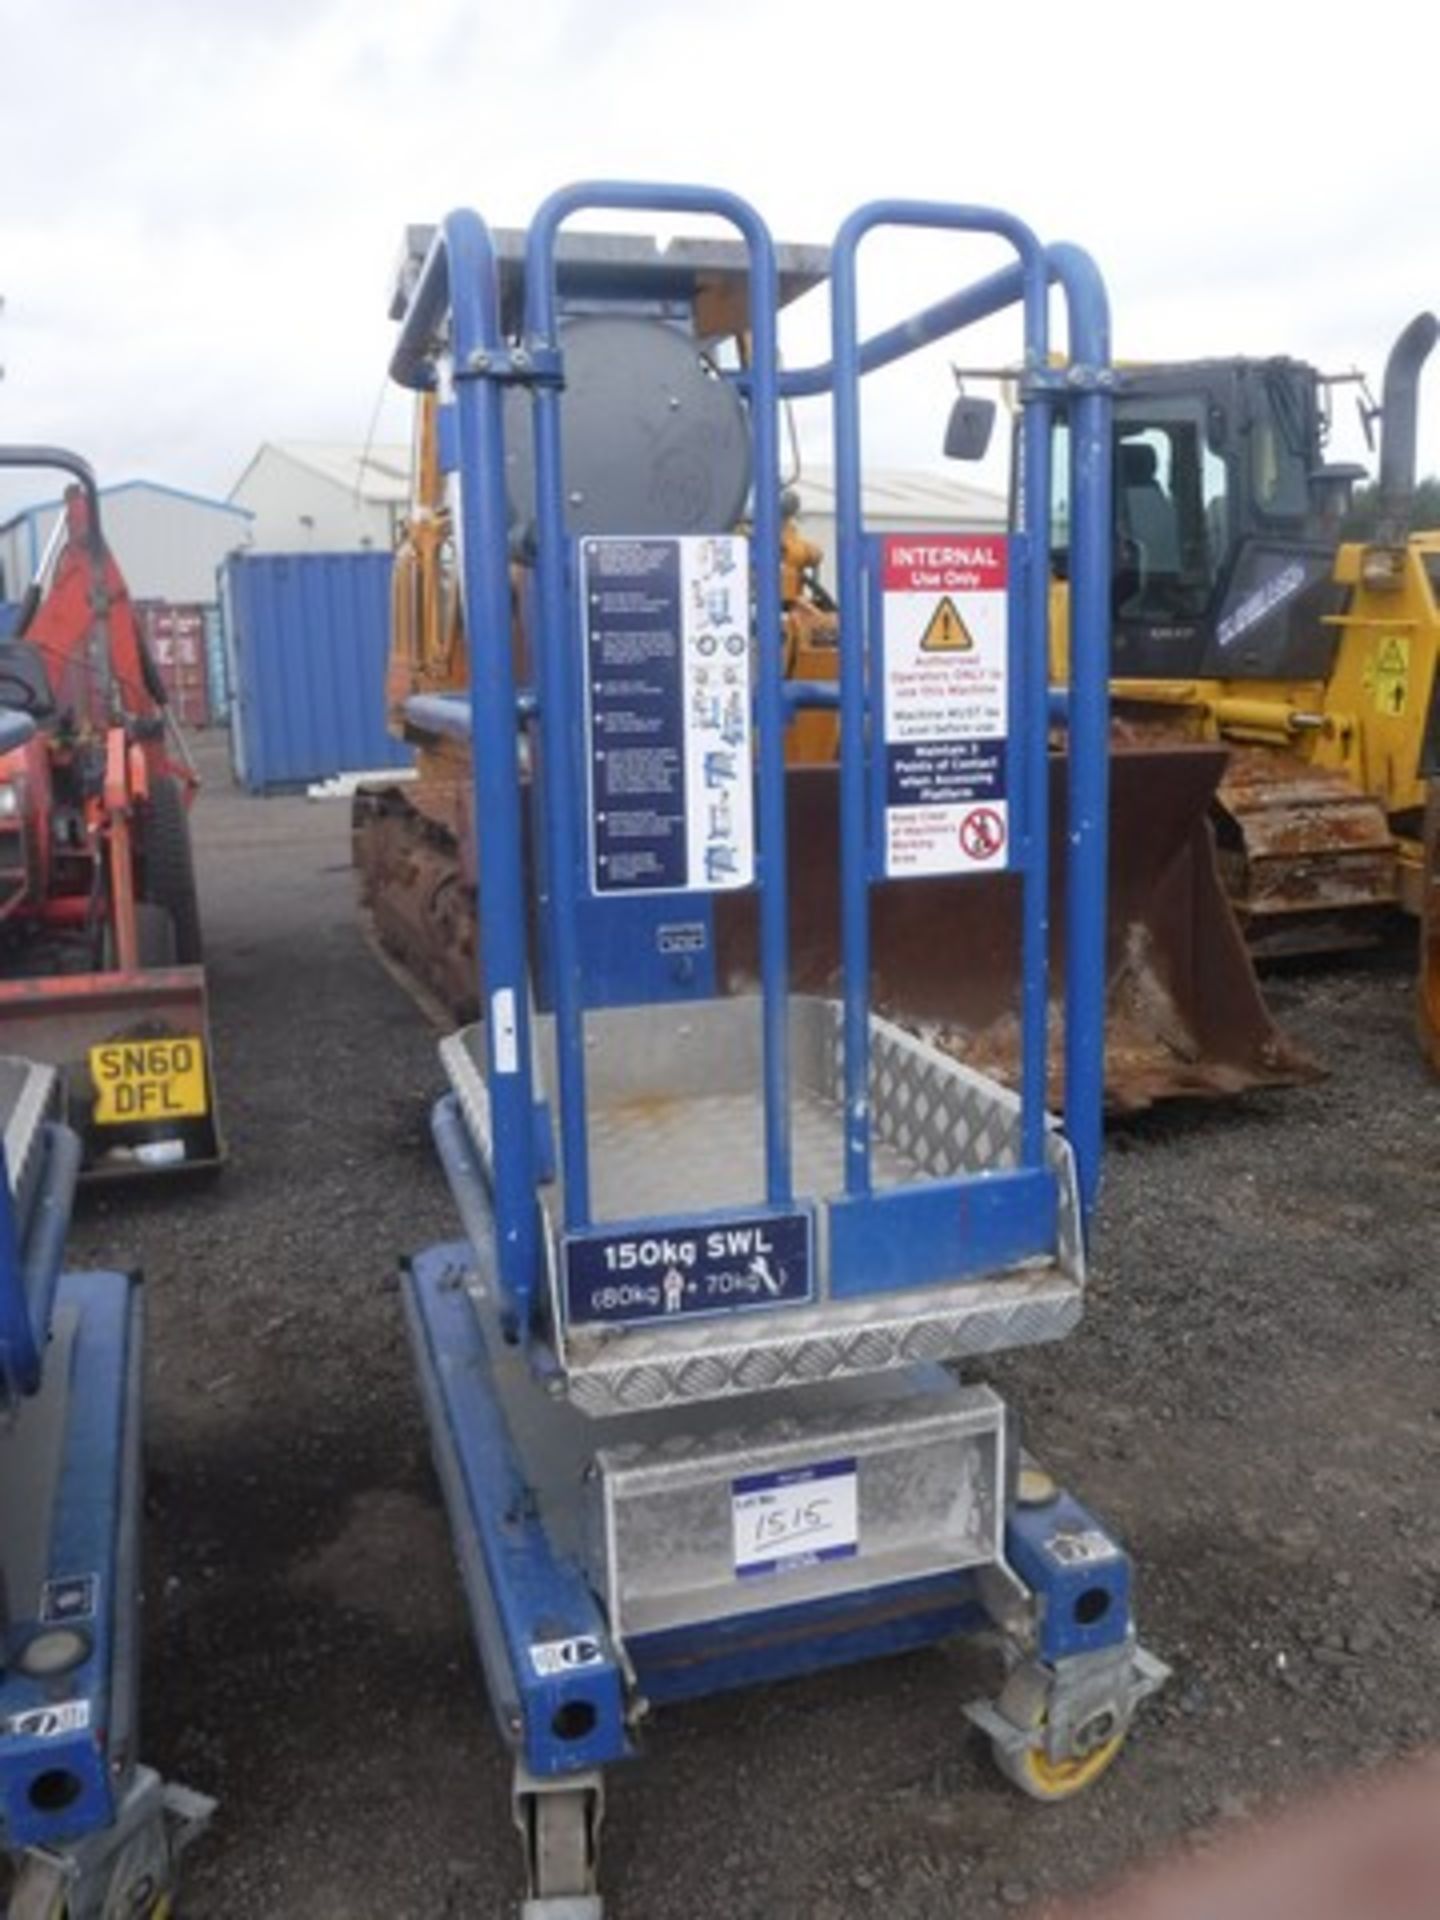 POWER TOWER ECOLIFT 2015 - LIFT CAPACITY 150KG REACH 4.2M SN - 66501515H - Image 2 of 4